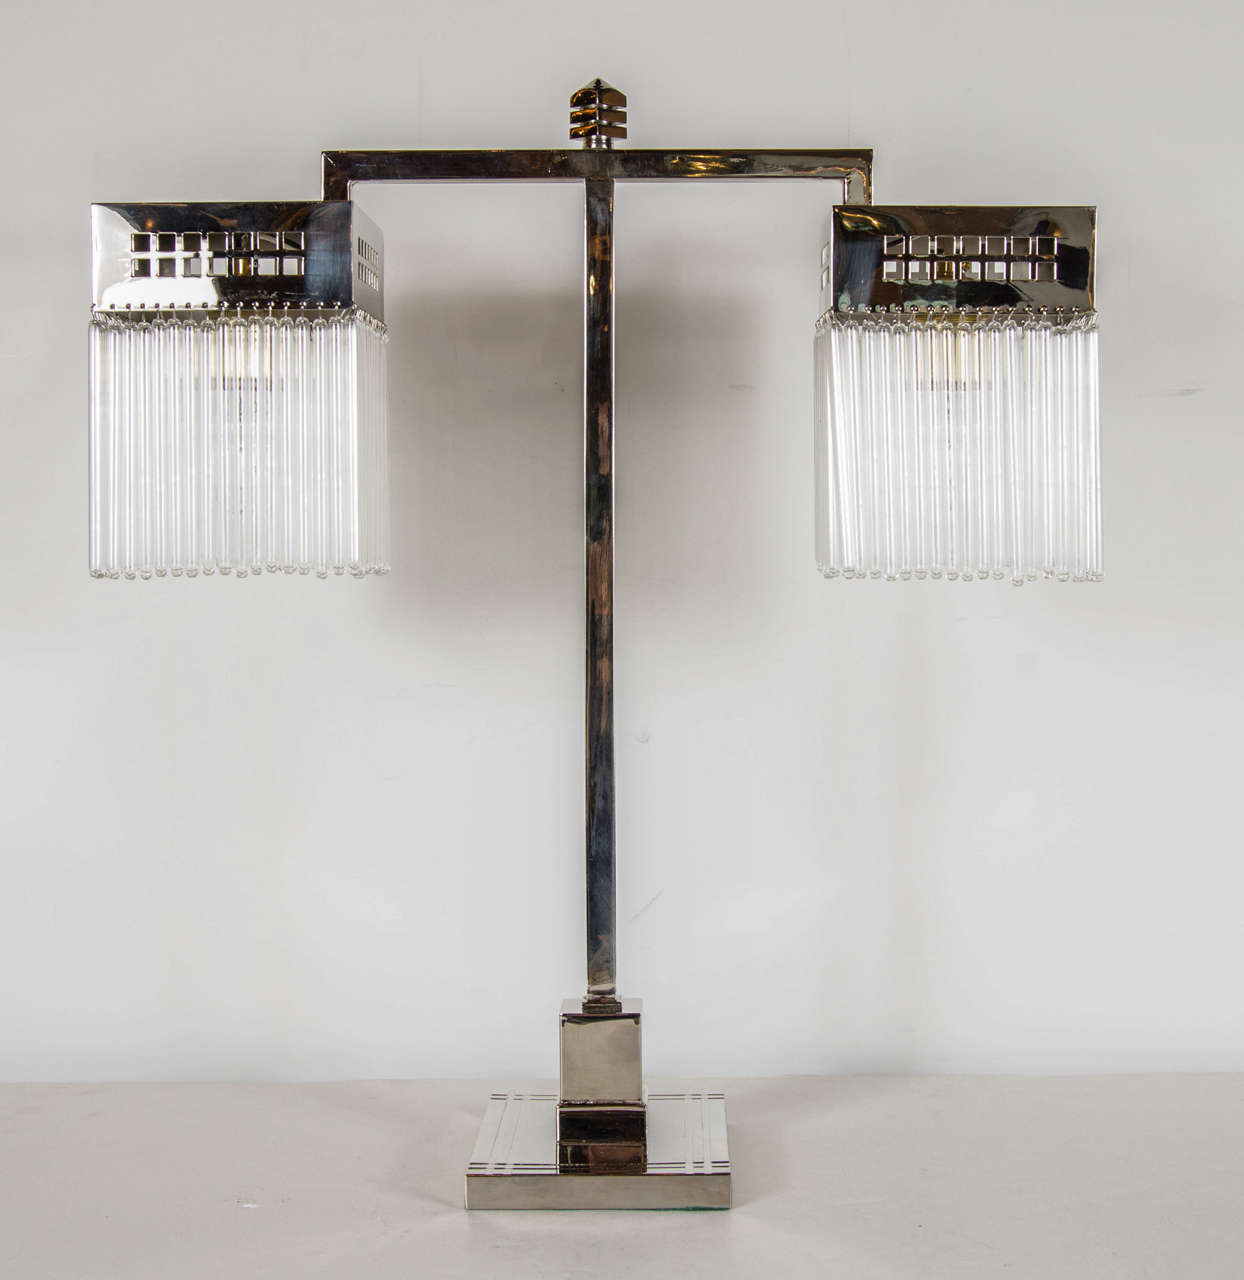 Art Deco Machine Age skyscraper style nickeled bronze table lamp in the manner of Joseph Hoffman. This table or desk lamp features an overall streamlined look with its geometric overall design. It has a squared off base with a two tiered adornment